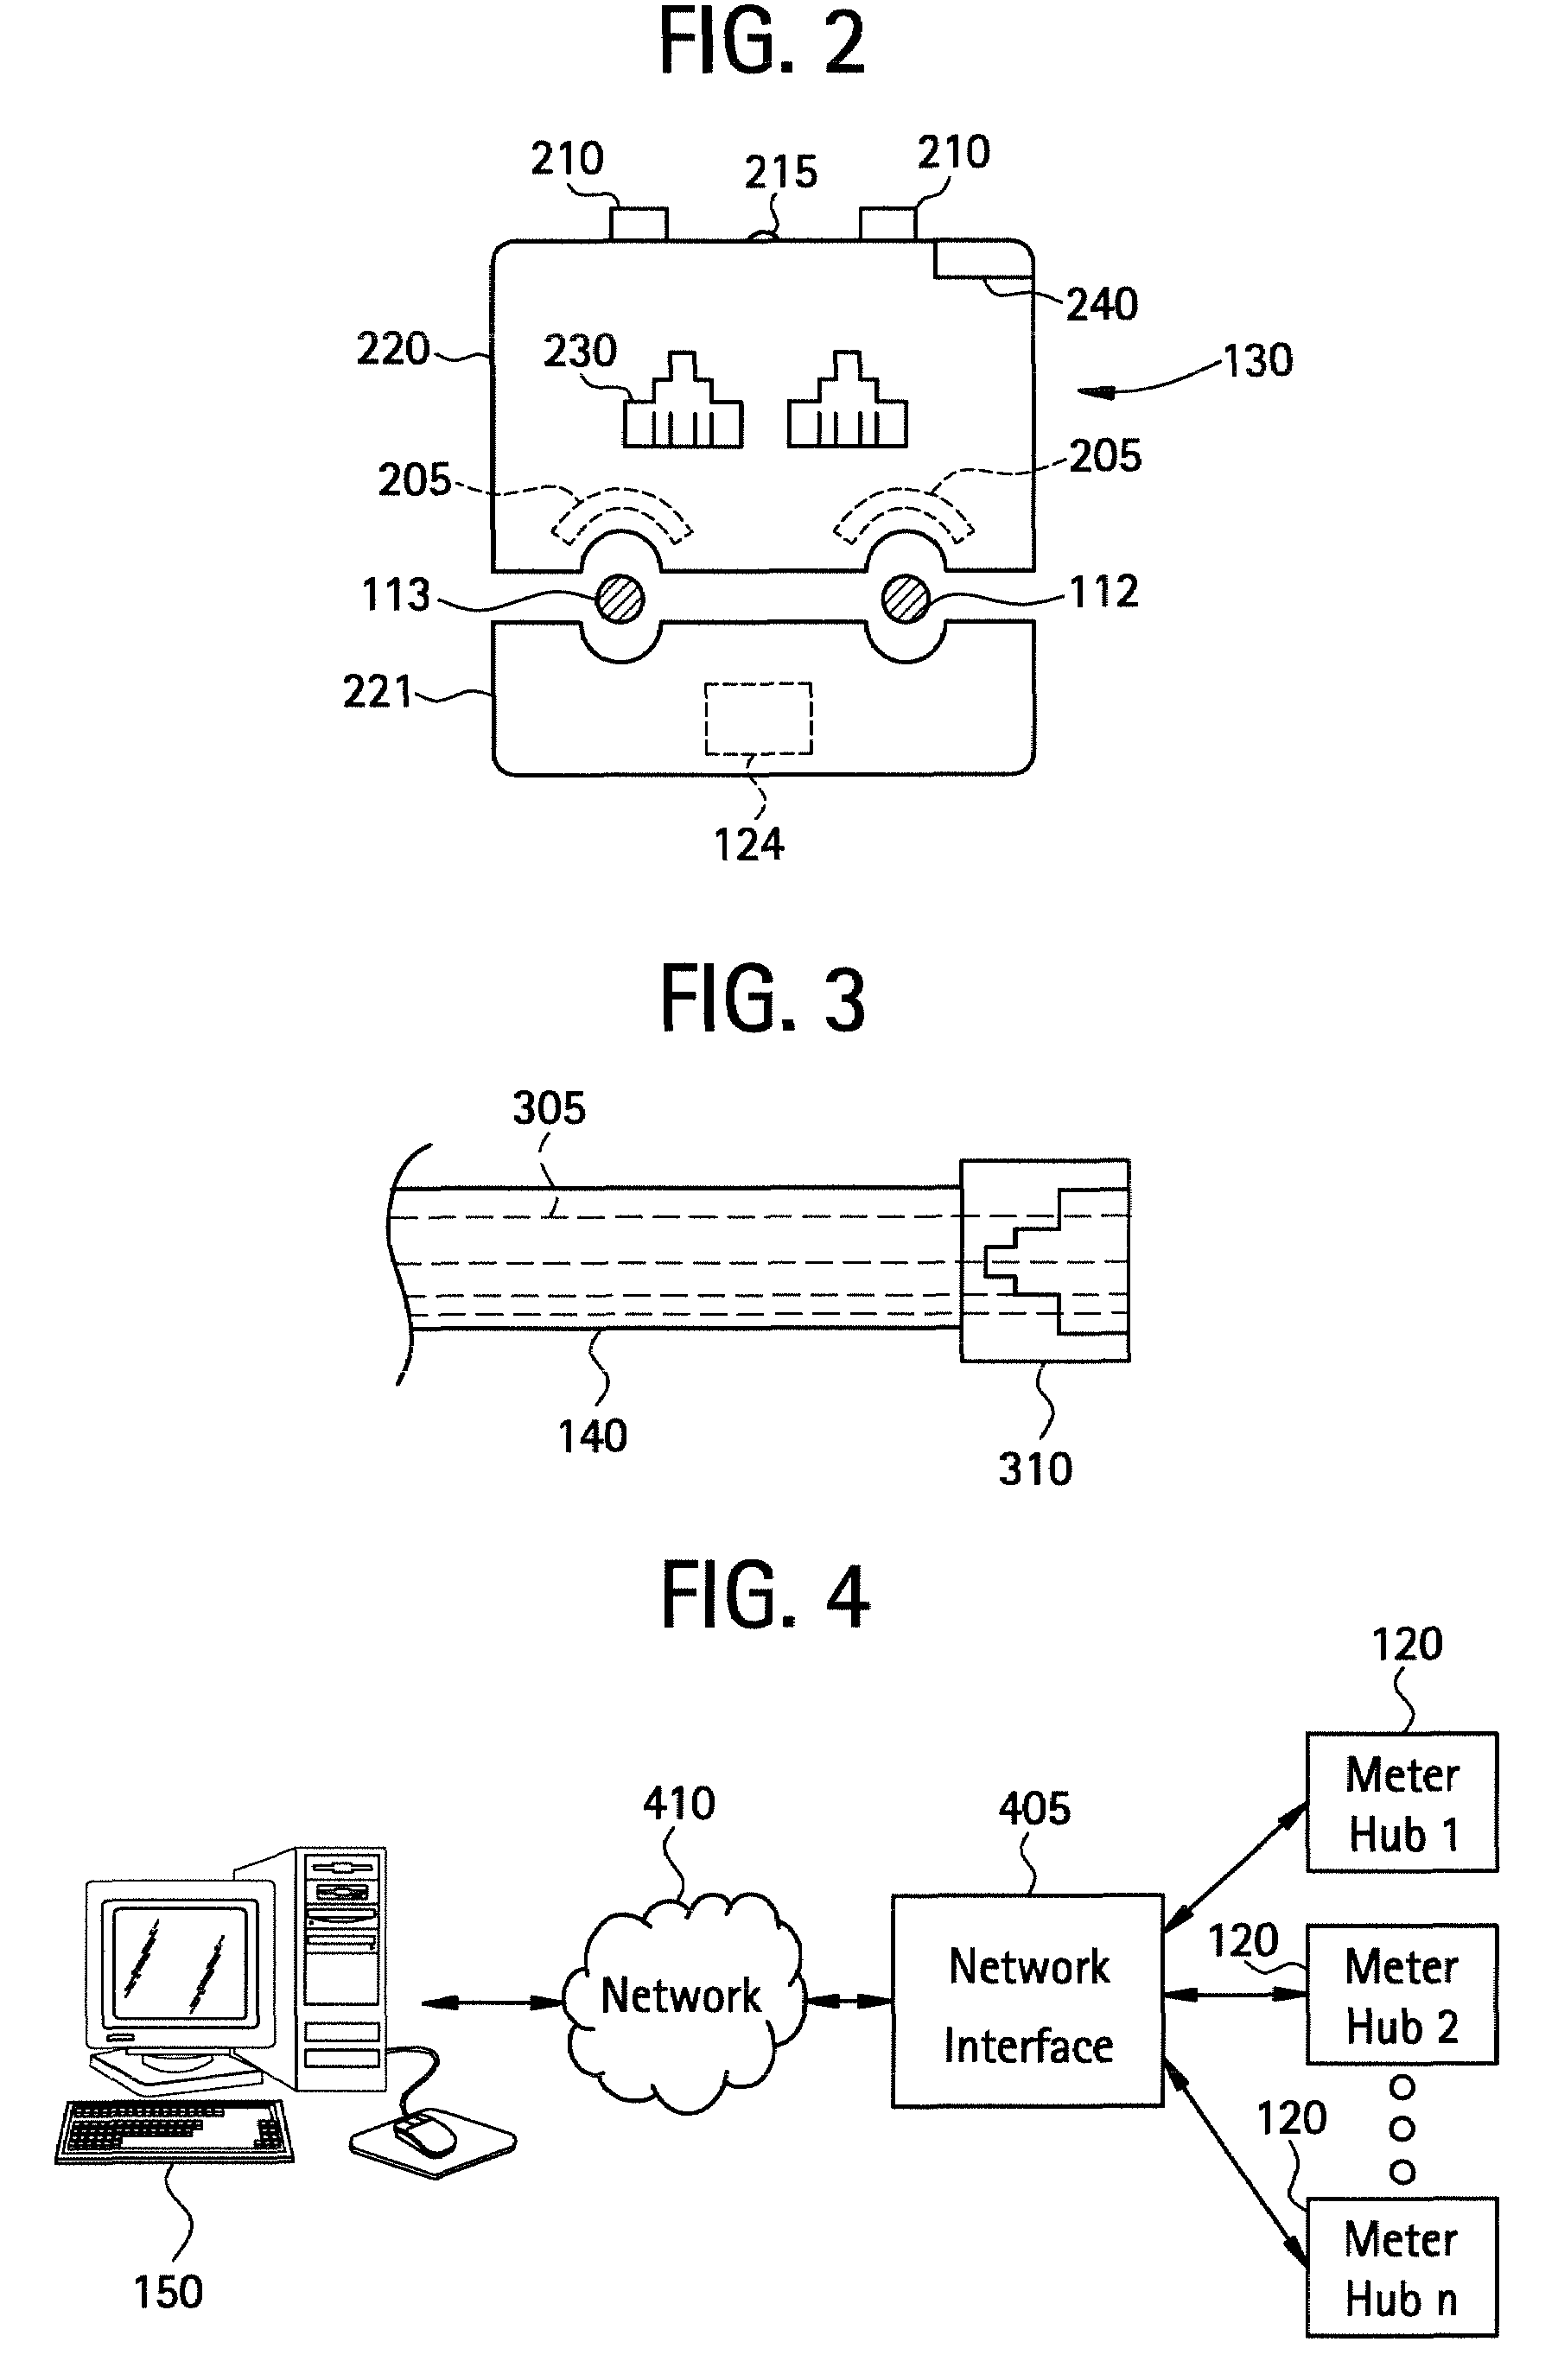 System for power sub-metering